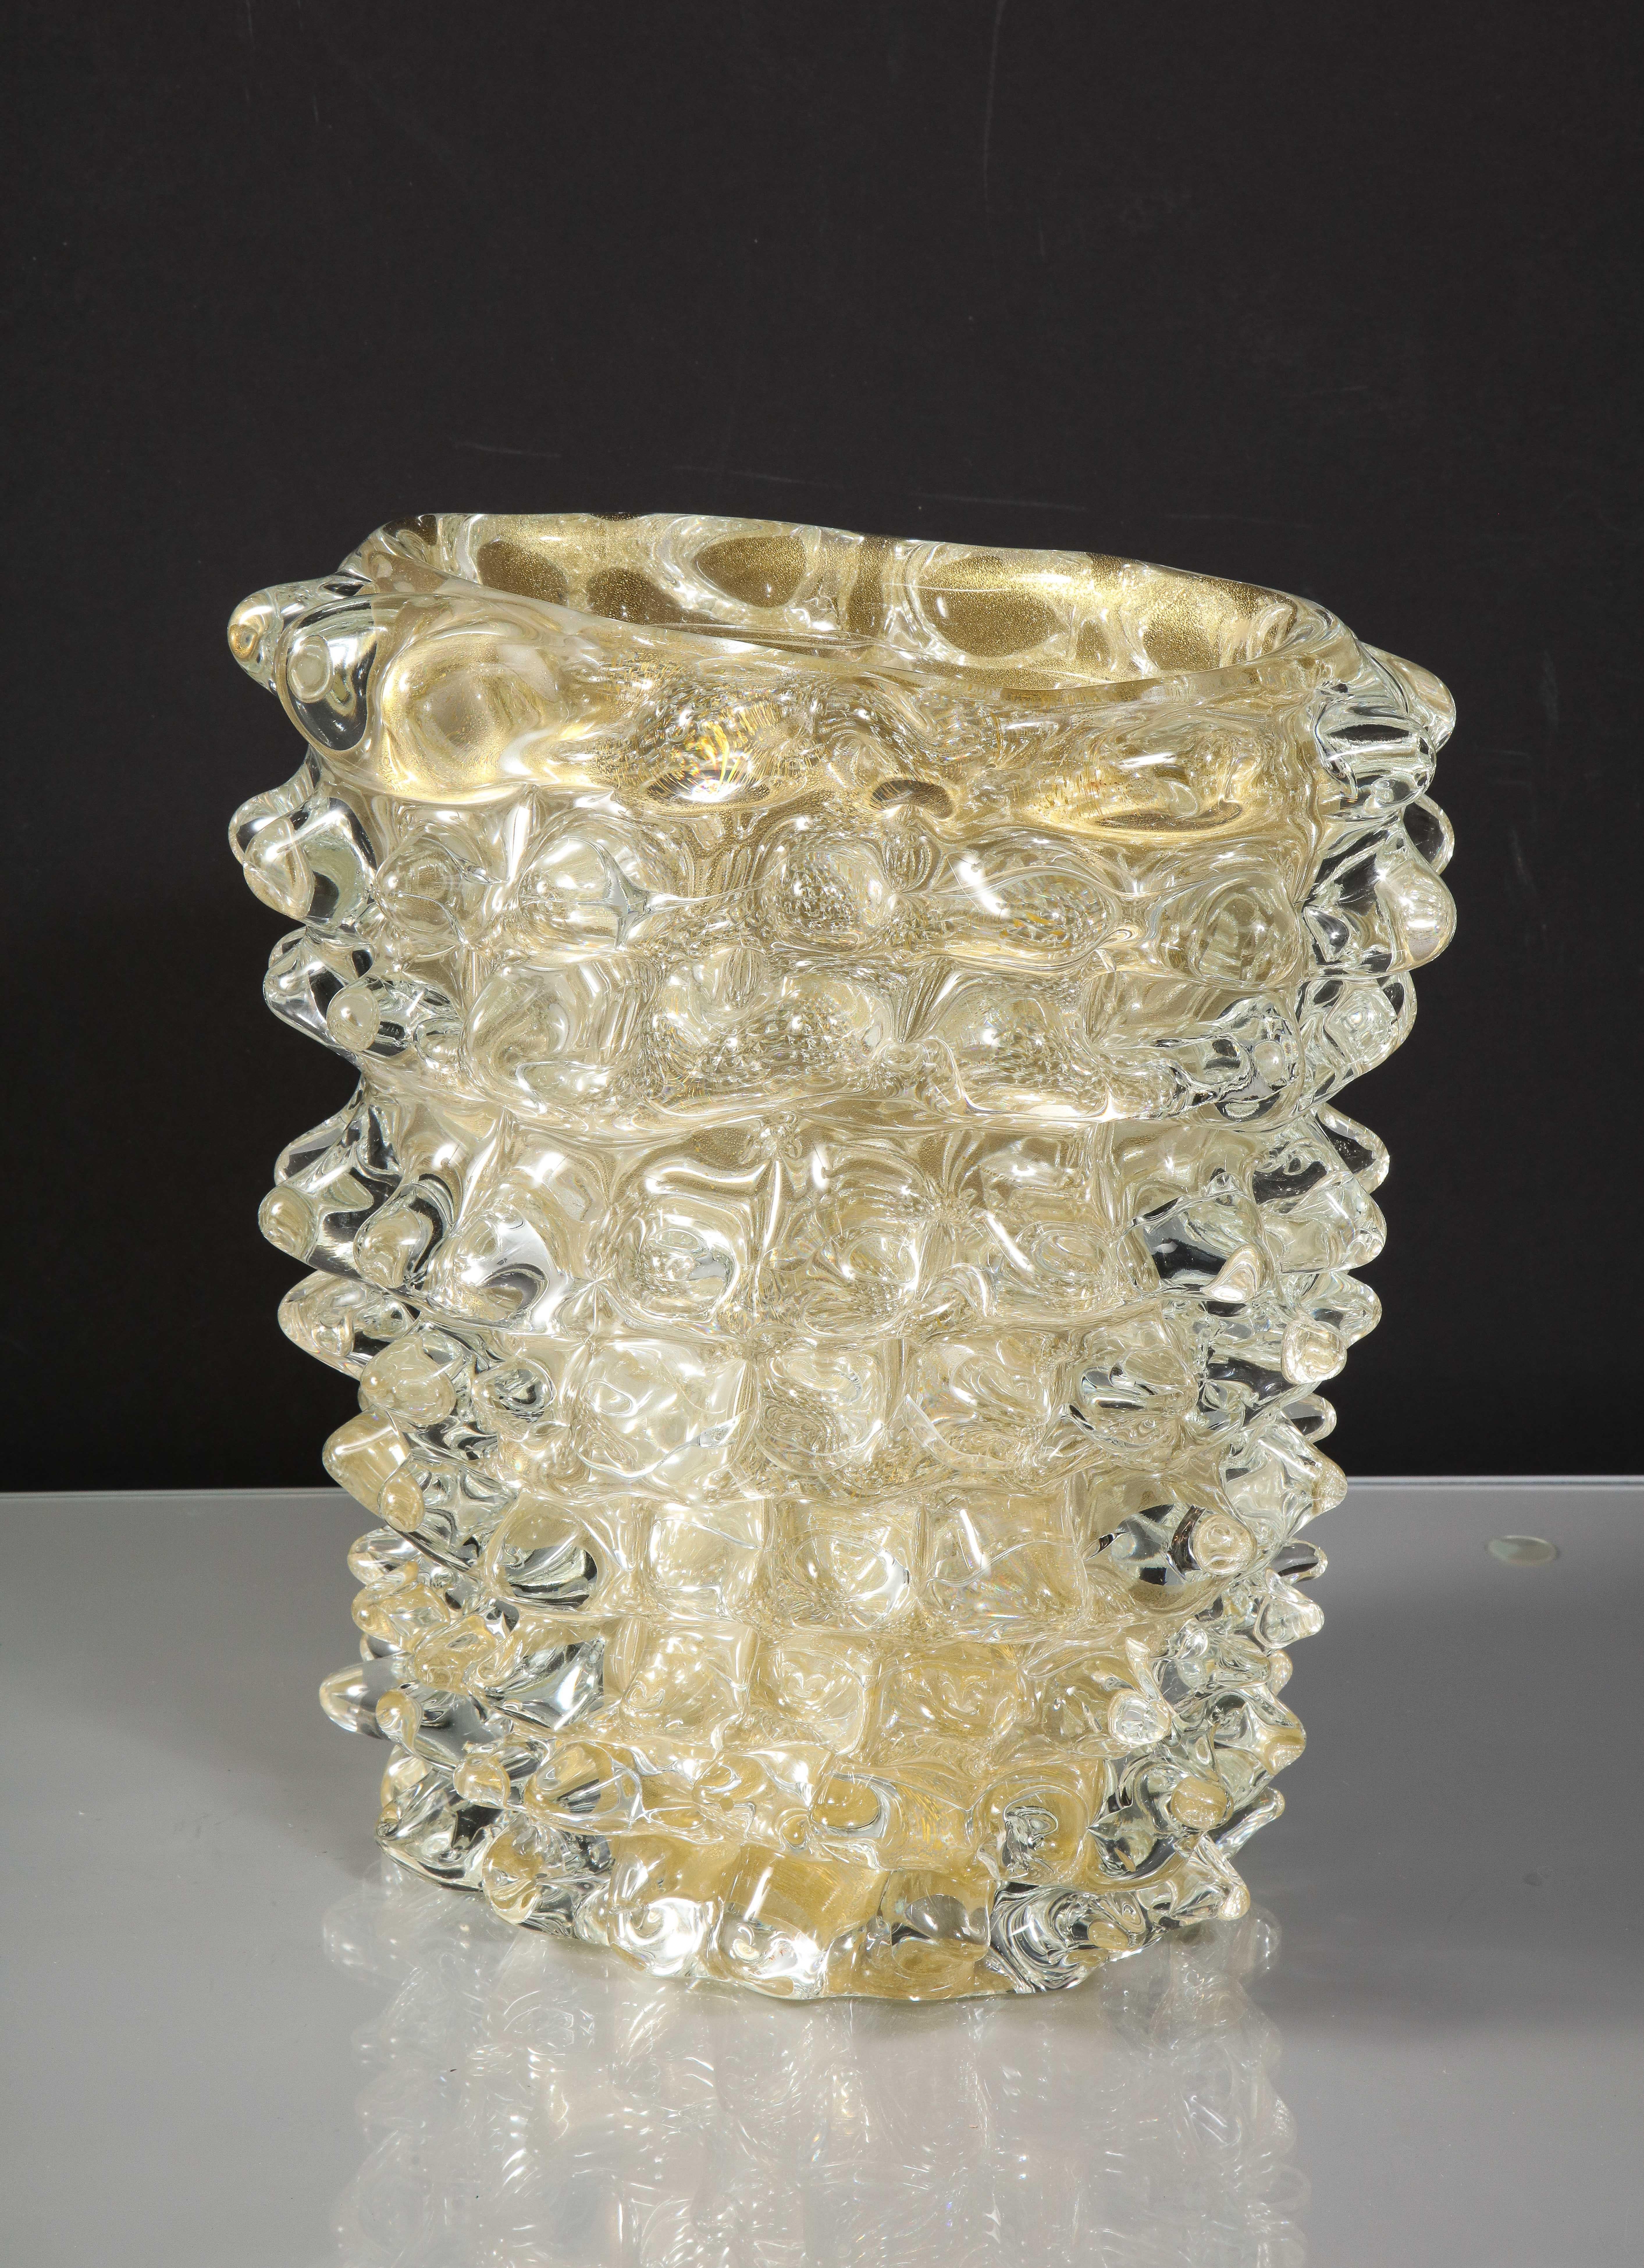 Hand-blown, mid-century style, gold glass vase with spike design in the manner of Barovier, Italy.